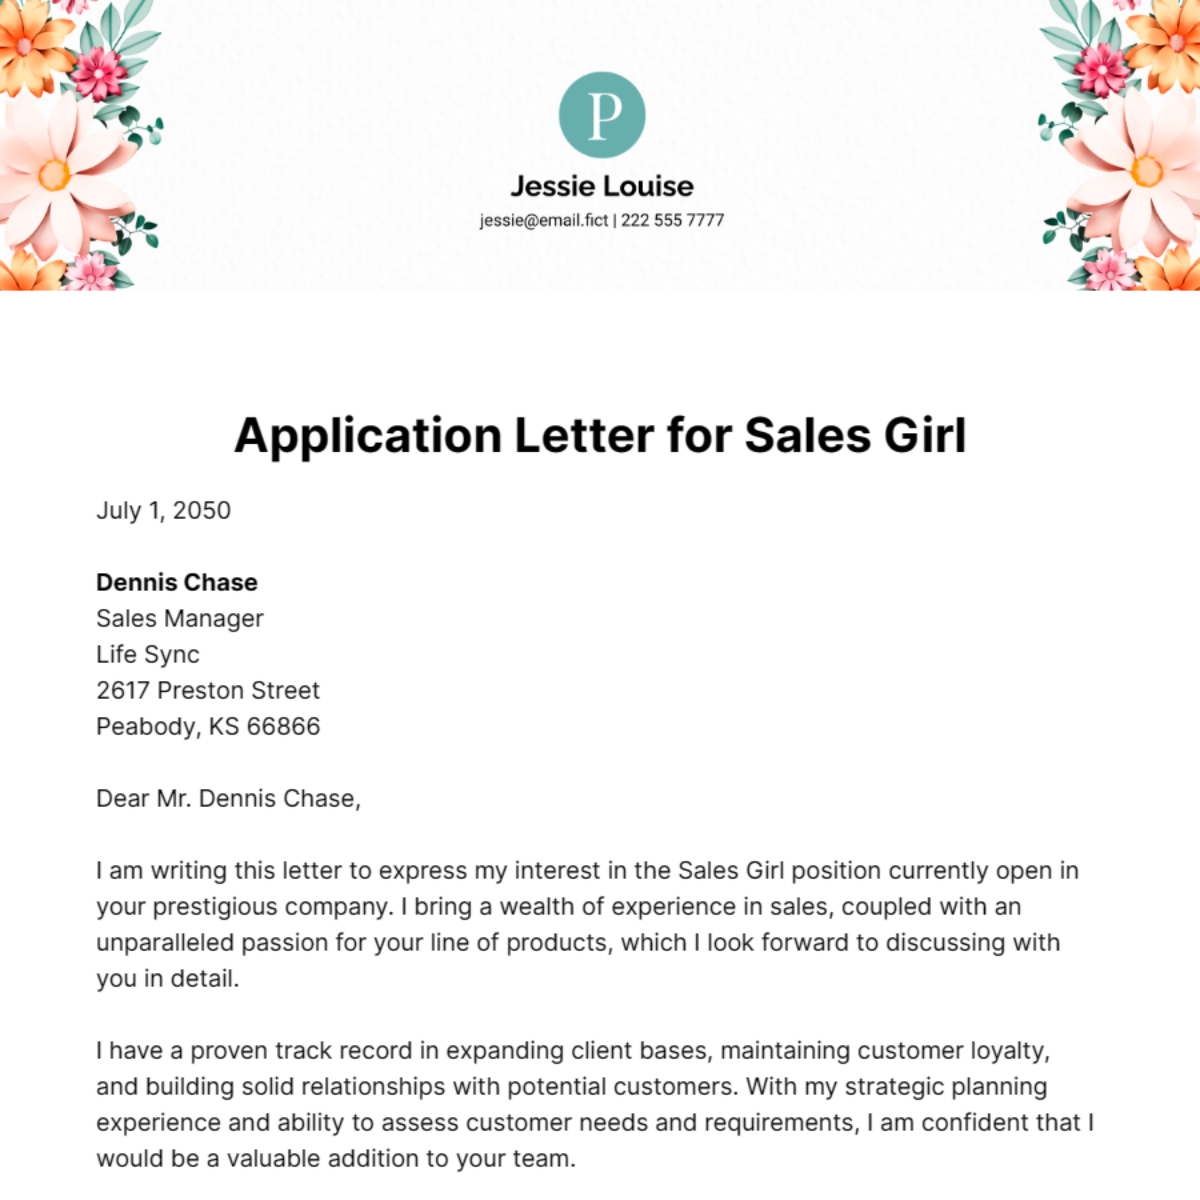 Application Letter for Sales Girl Template